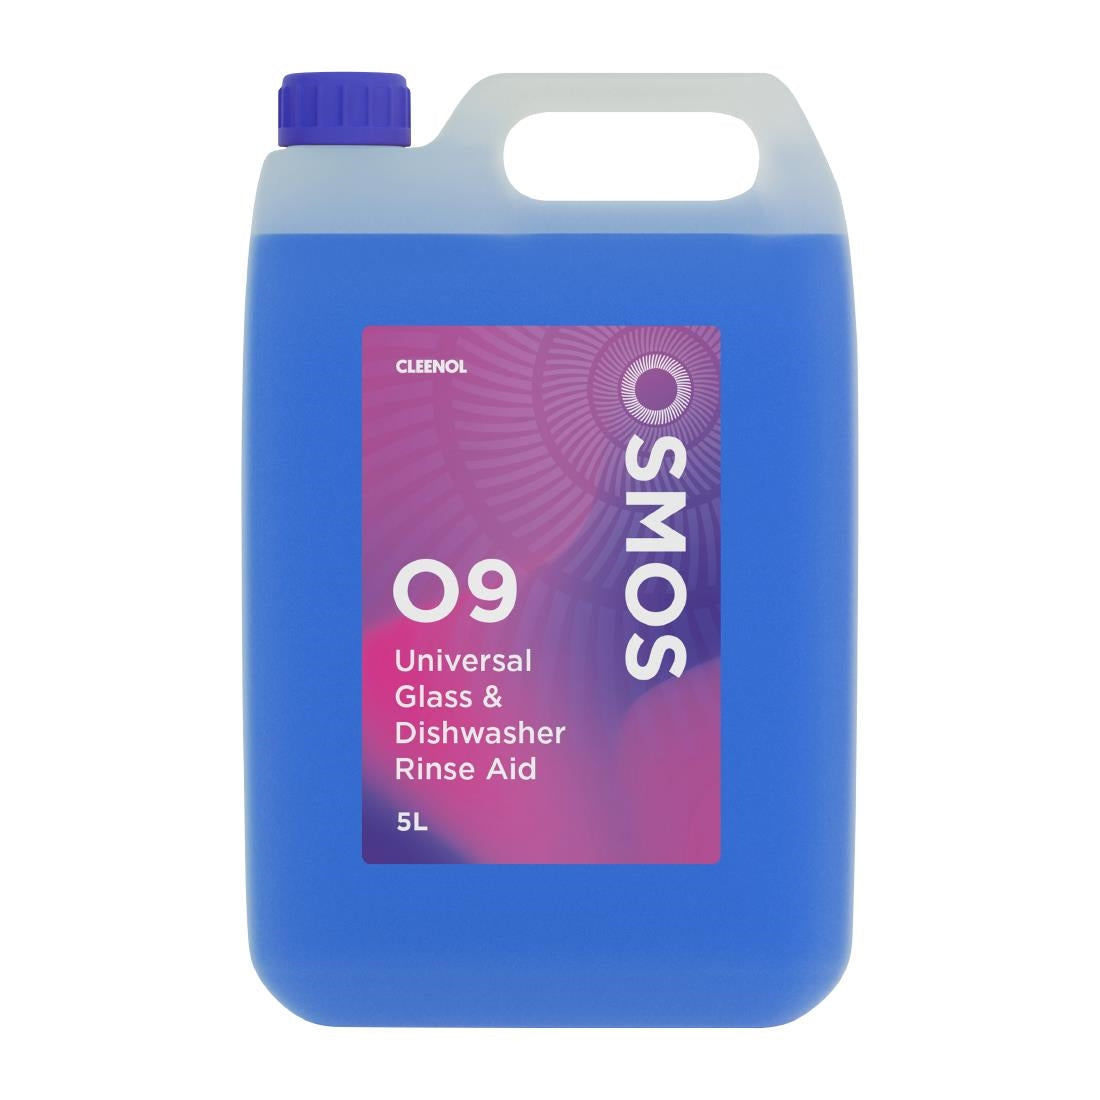 CU597 OSMOS Universal Glass and Dishwasher Rinse Aid (2x5Ltr) JD Catering Equipment Solutions Ltd